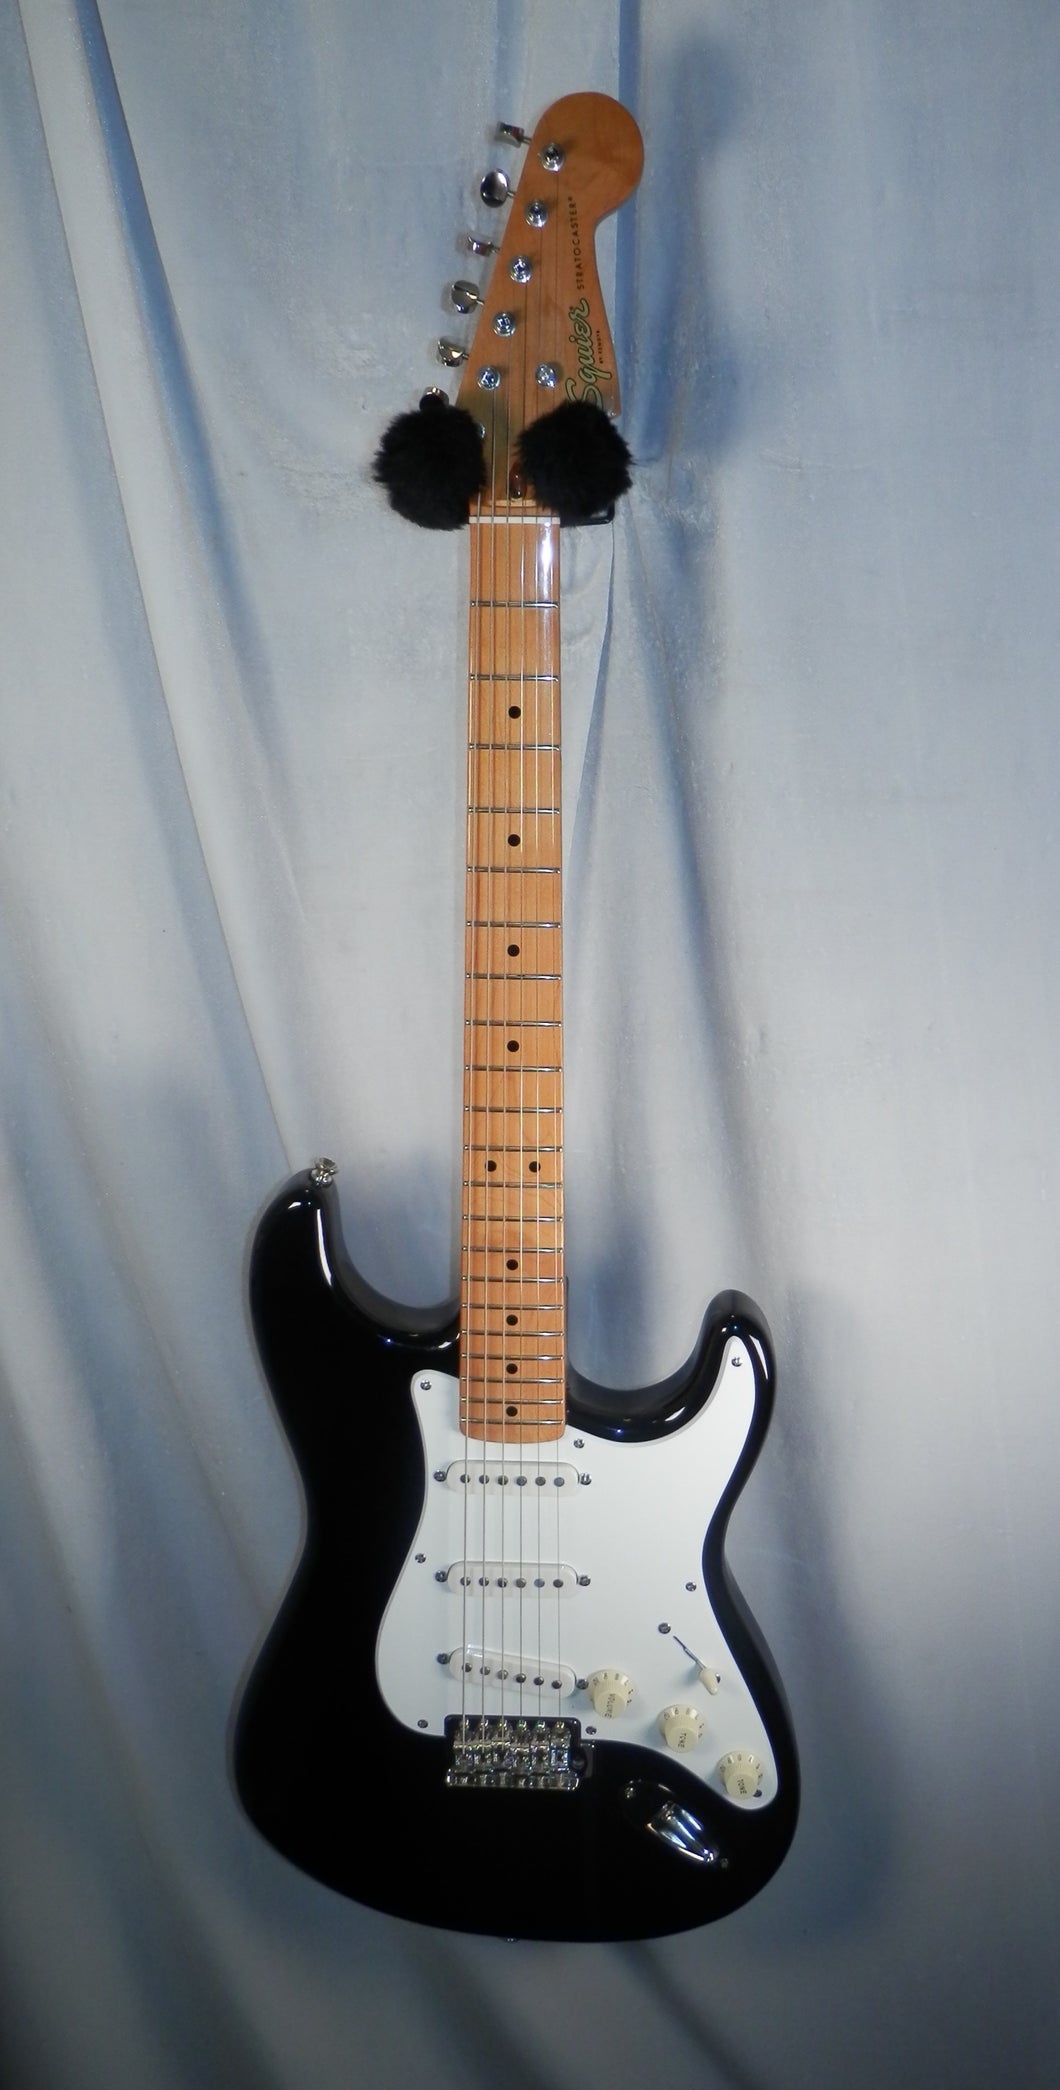 Squier by Fender 50's Classic Vibe Stratocaster Maple Neck Black Finish used electric guitar Strat